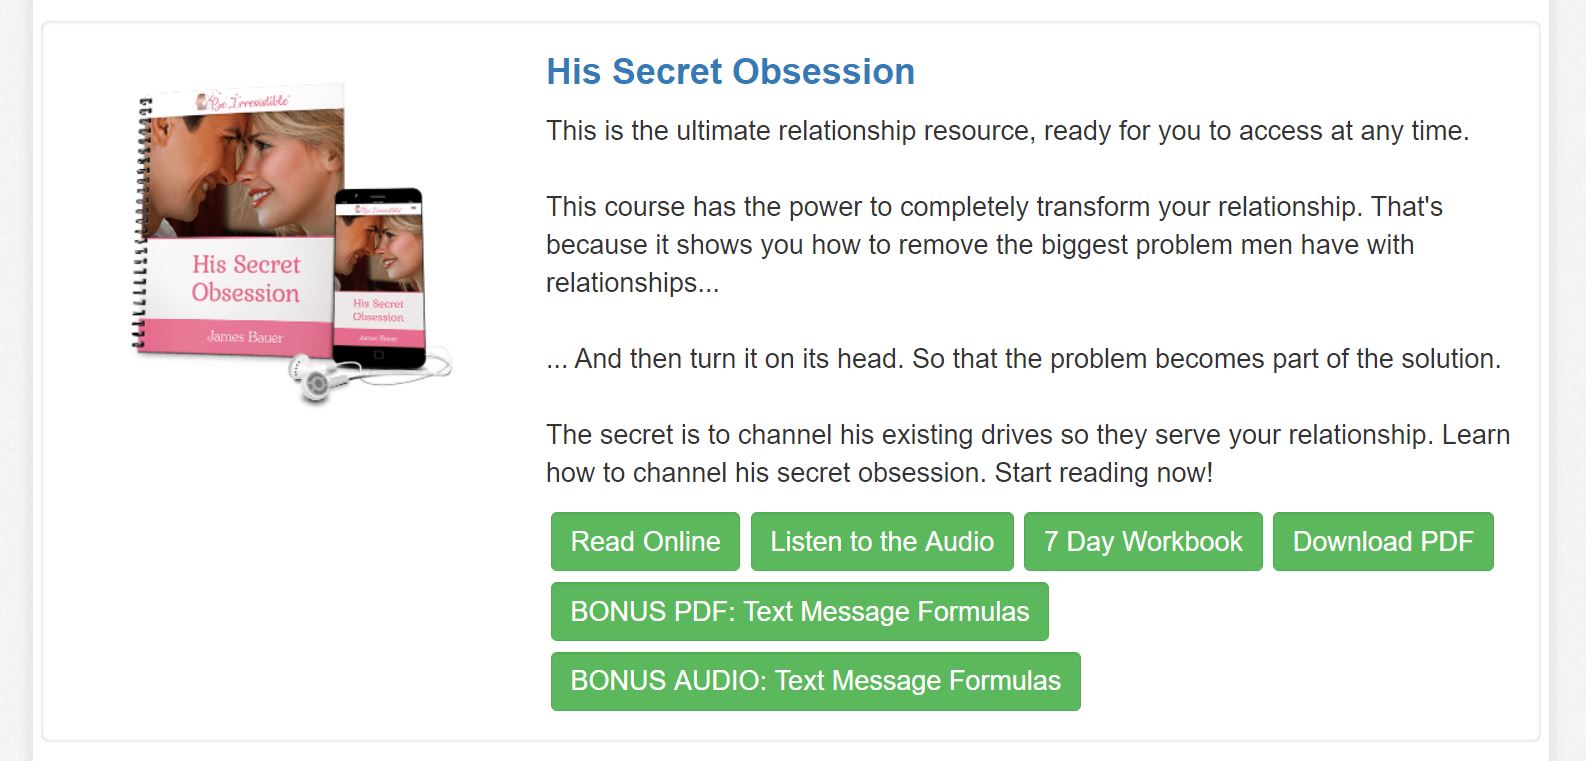 His Secret Obsession Review Expert Interview